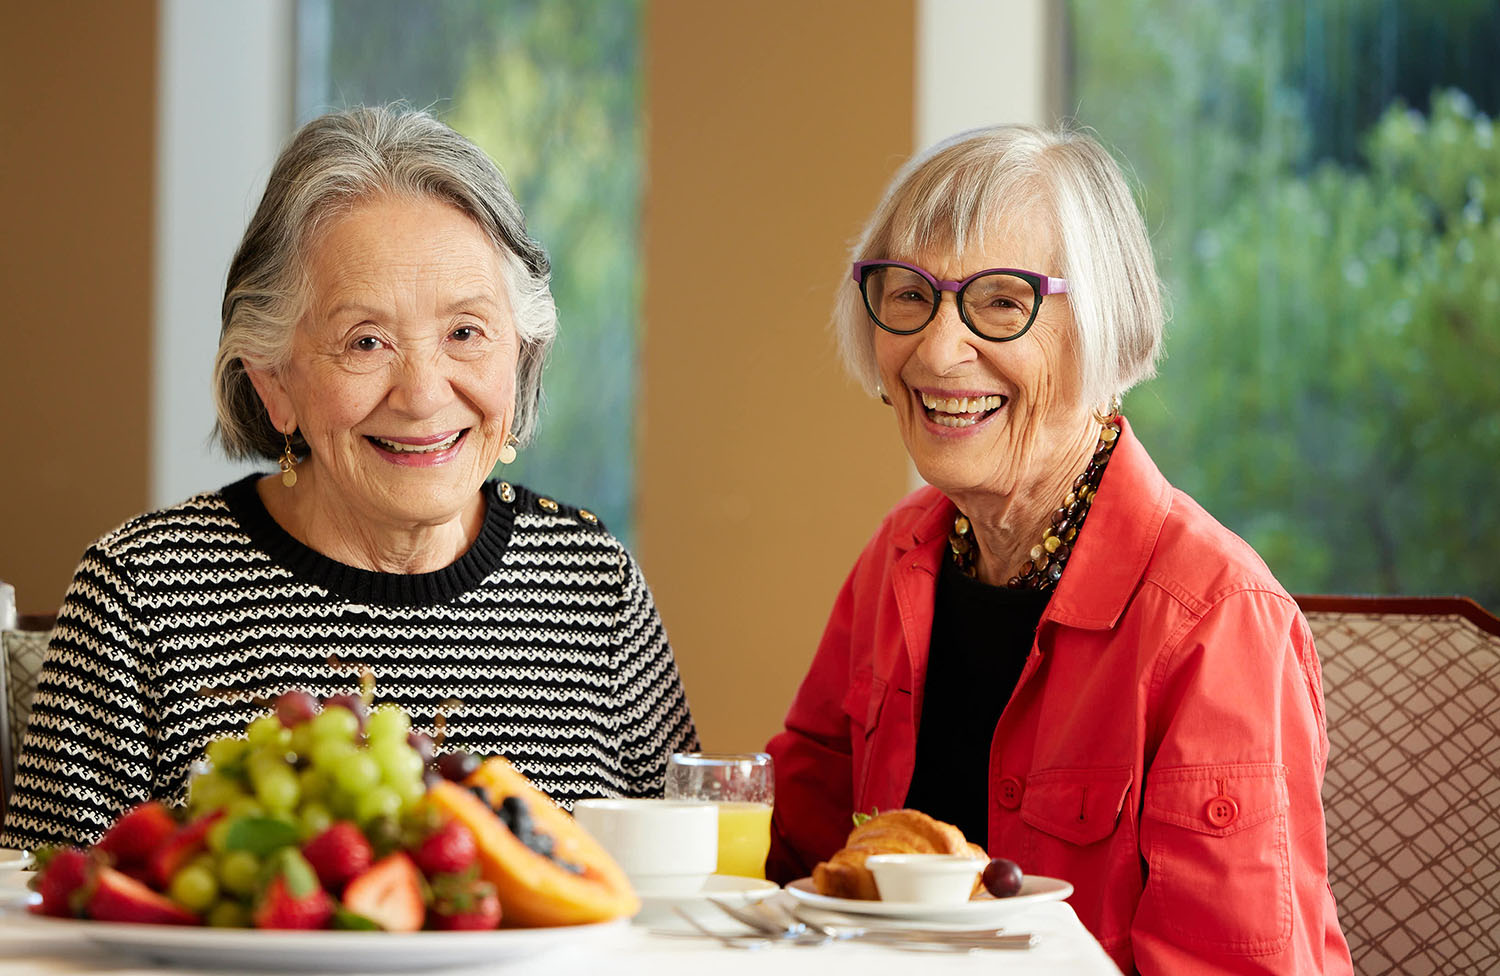 two women smiling at the camera. enjoying healthy breakfast foods